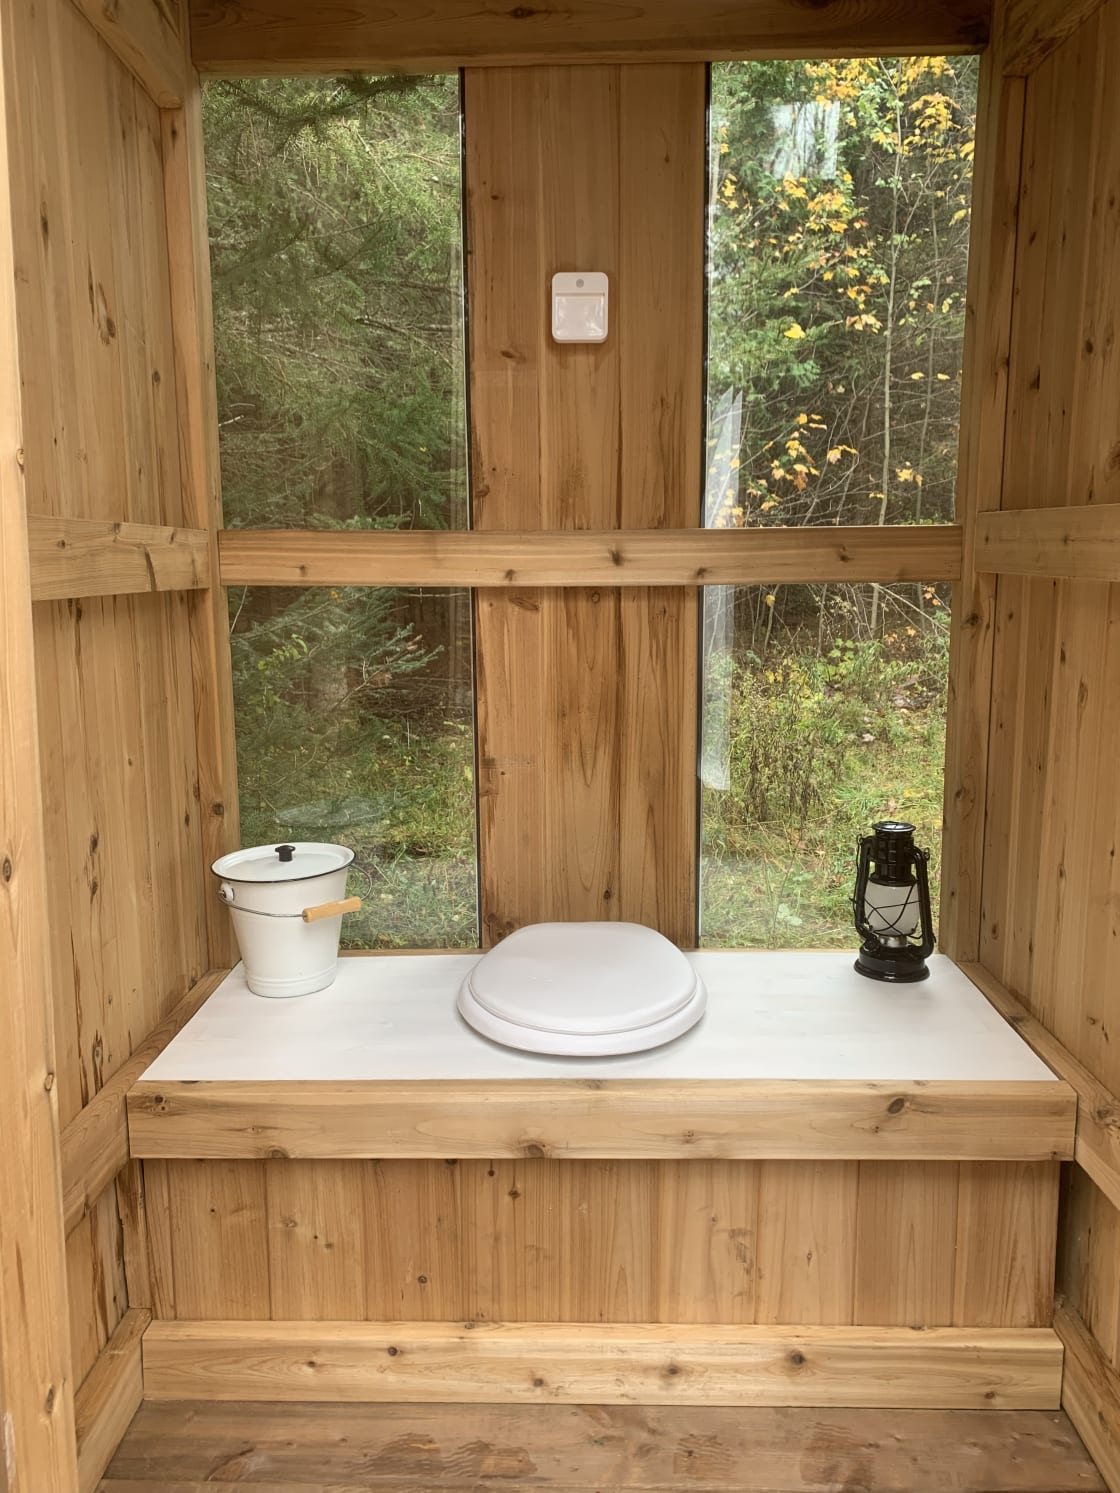 The refurbished outhouse. The toilet is composting and is changed after every guest.  